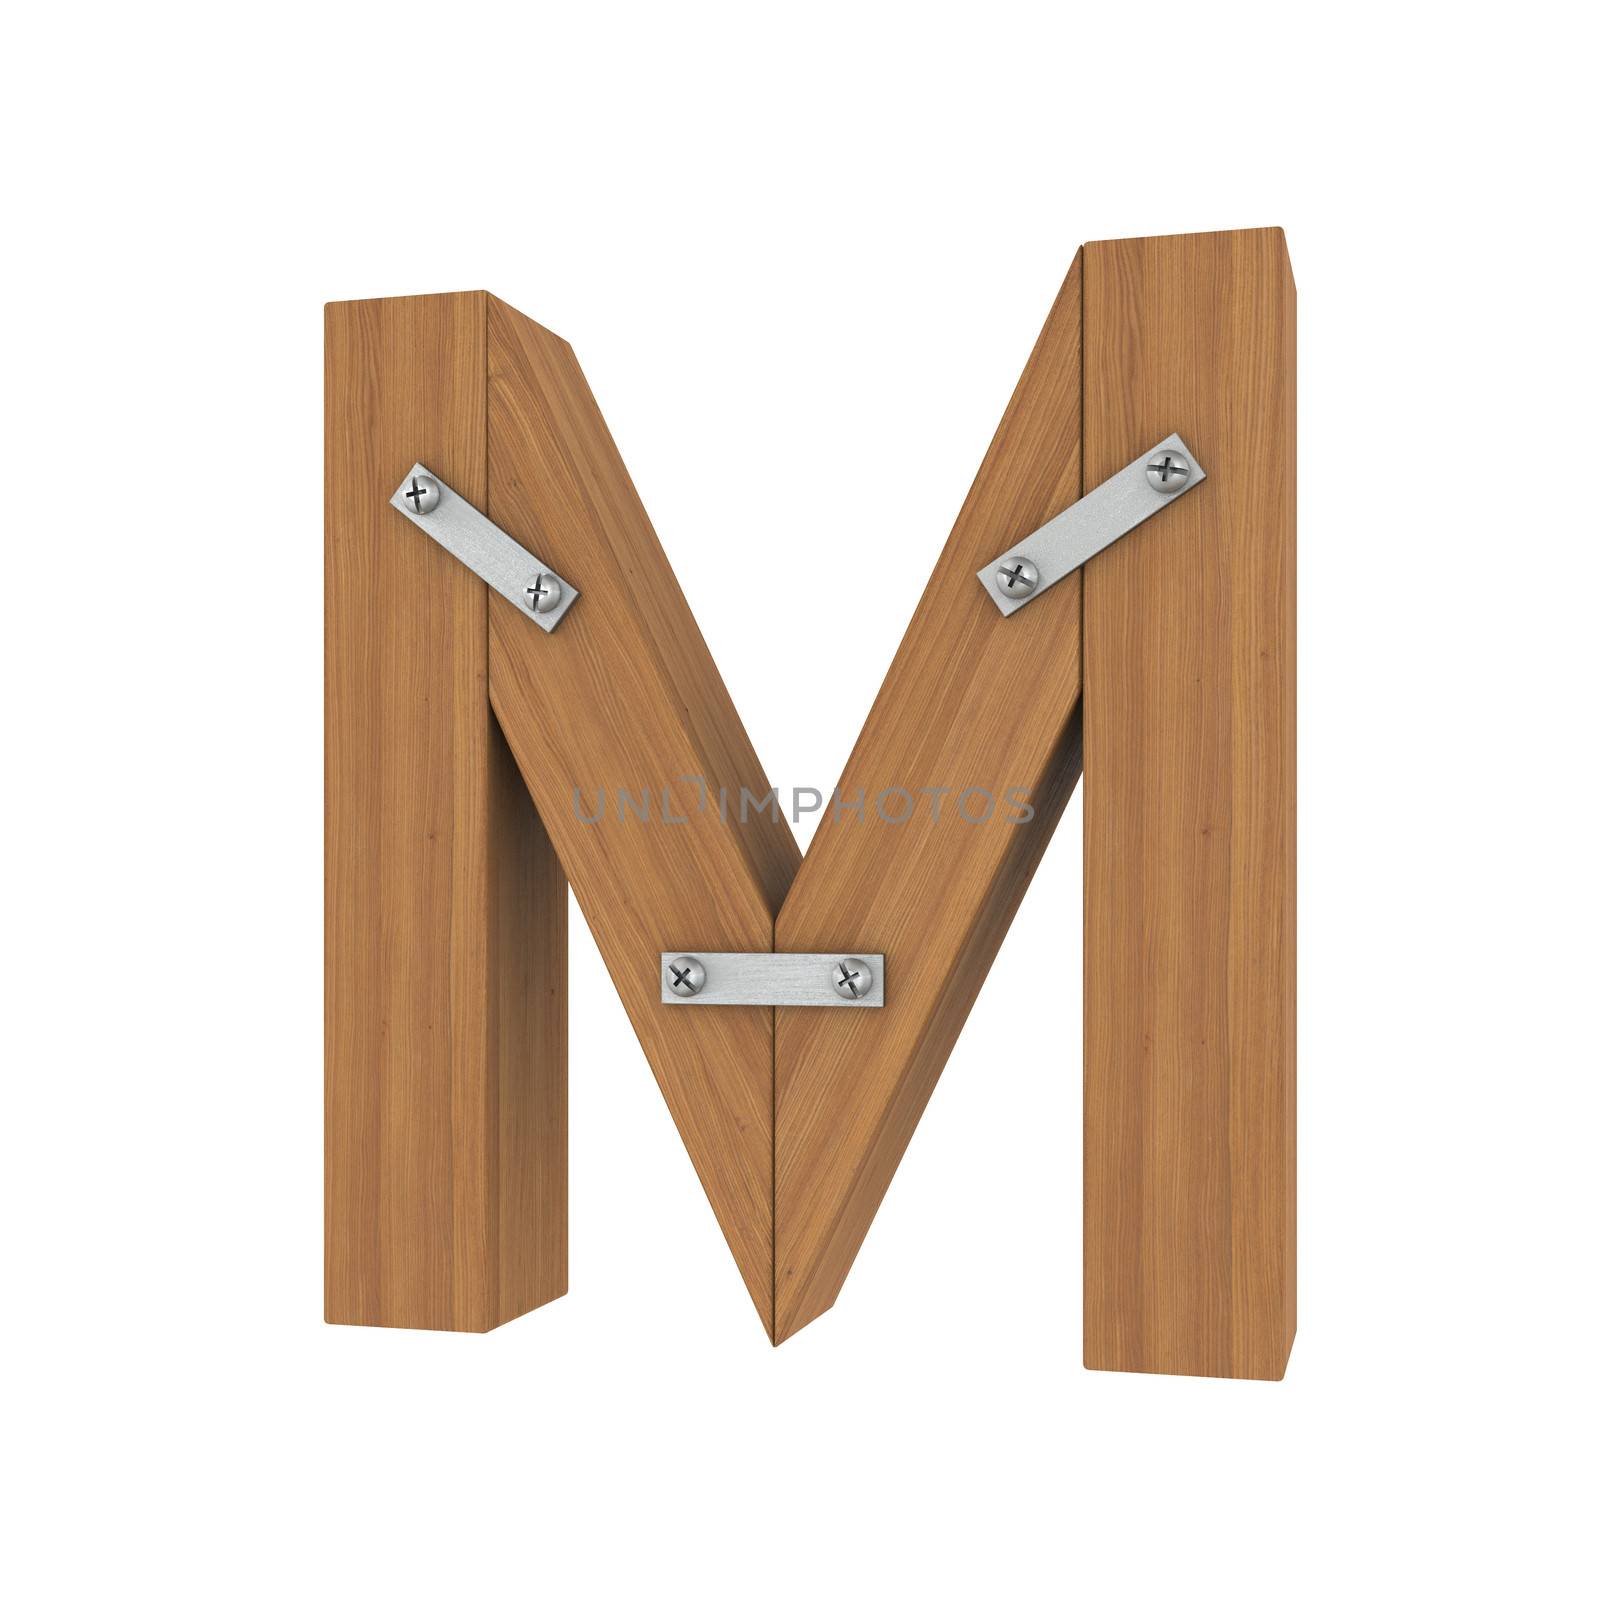 Wooden letter M. Isolated render on a white background